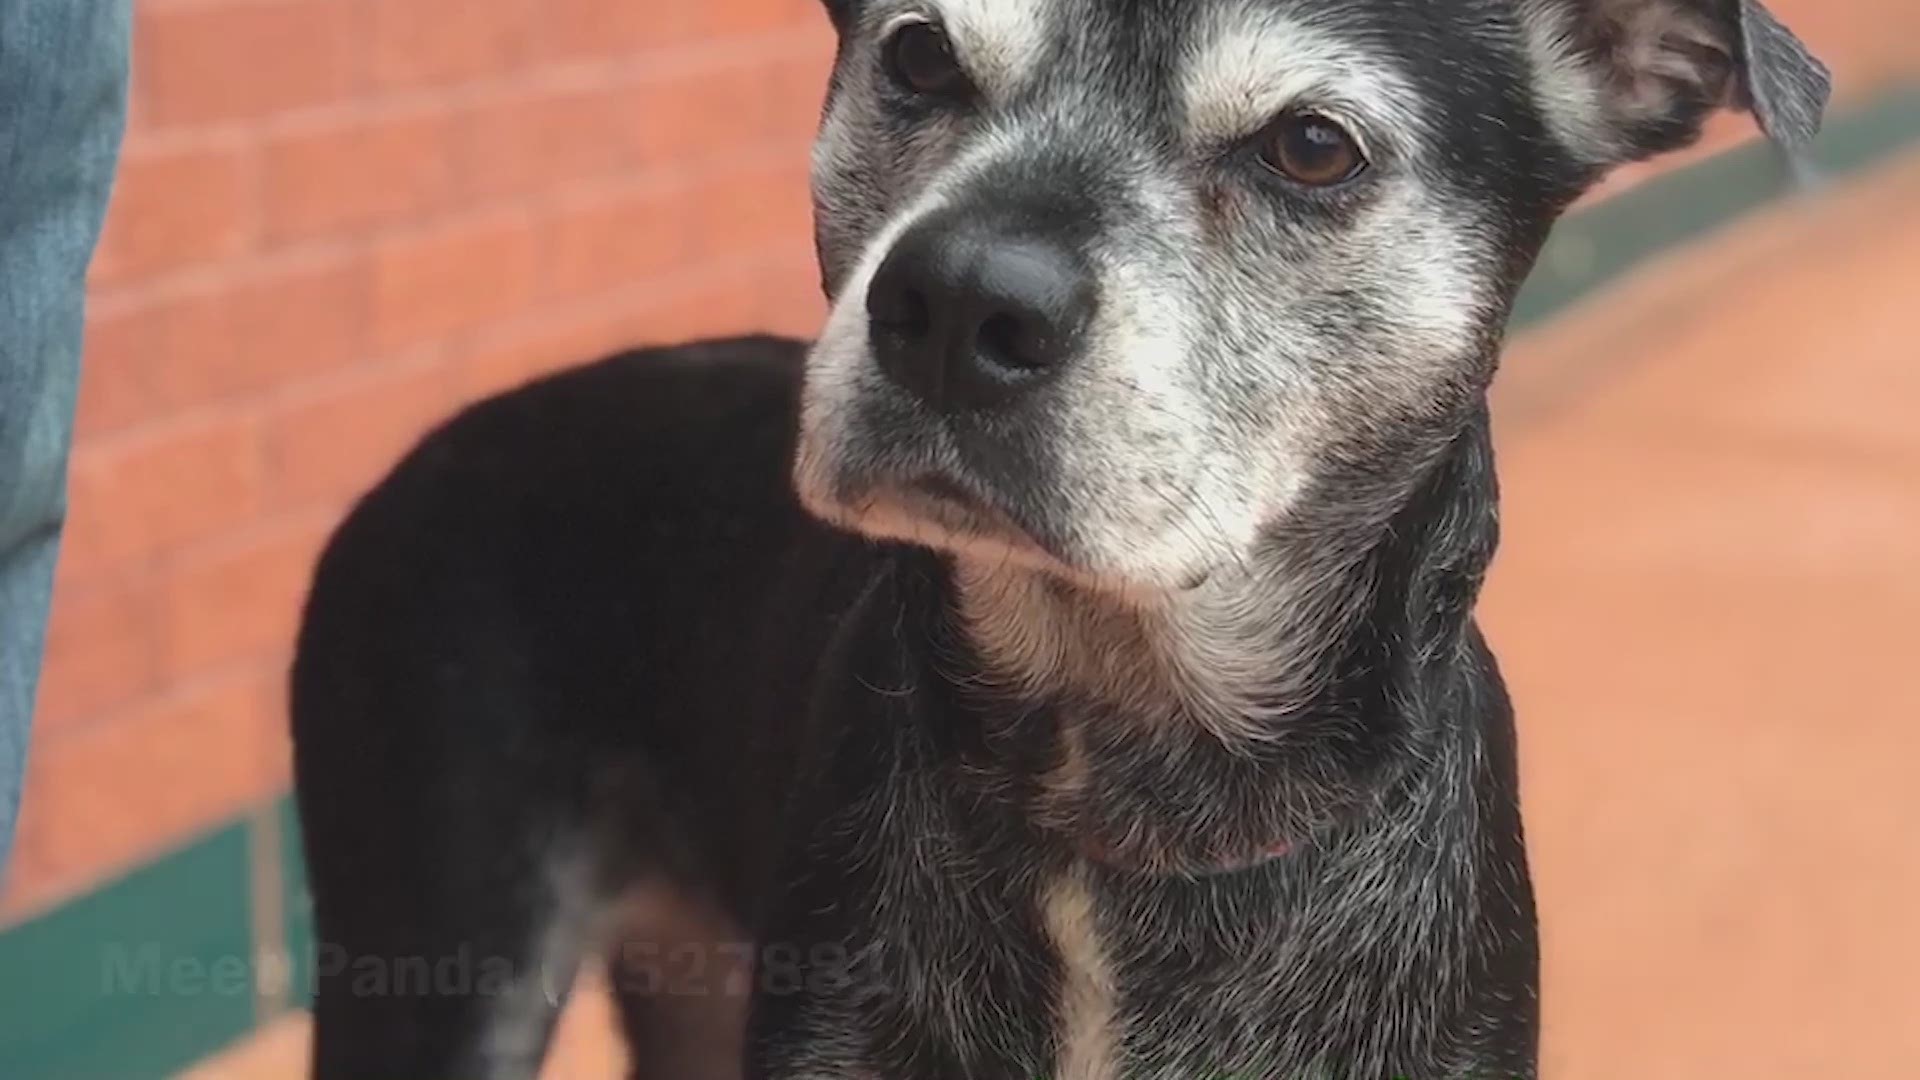 She's a 7-year-old lab mix who was surrendered to the shelter Thursday morning.